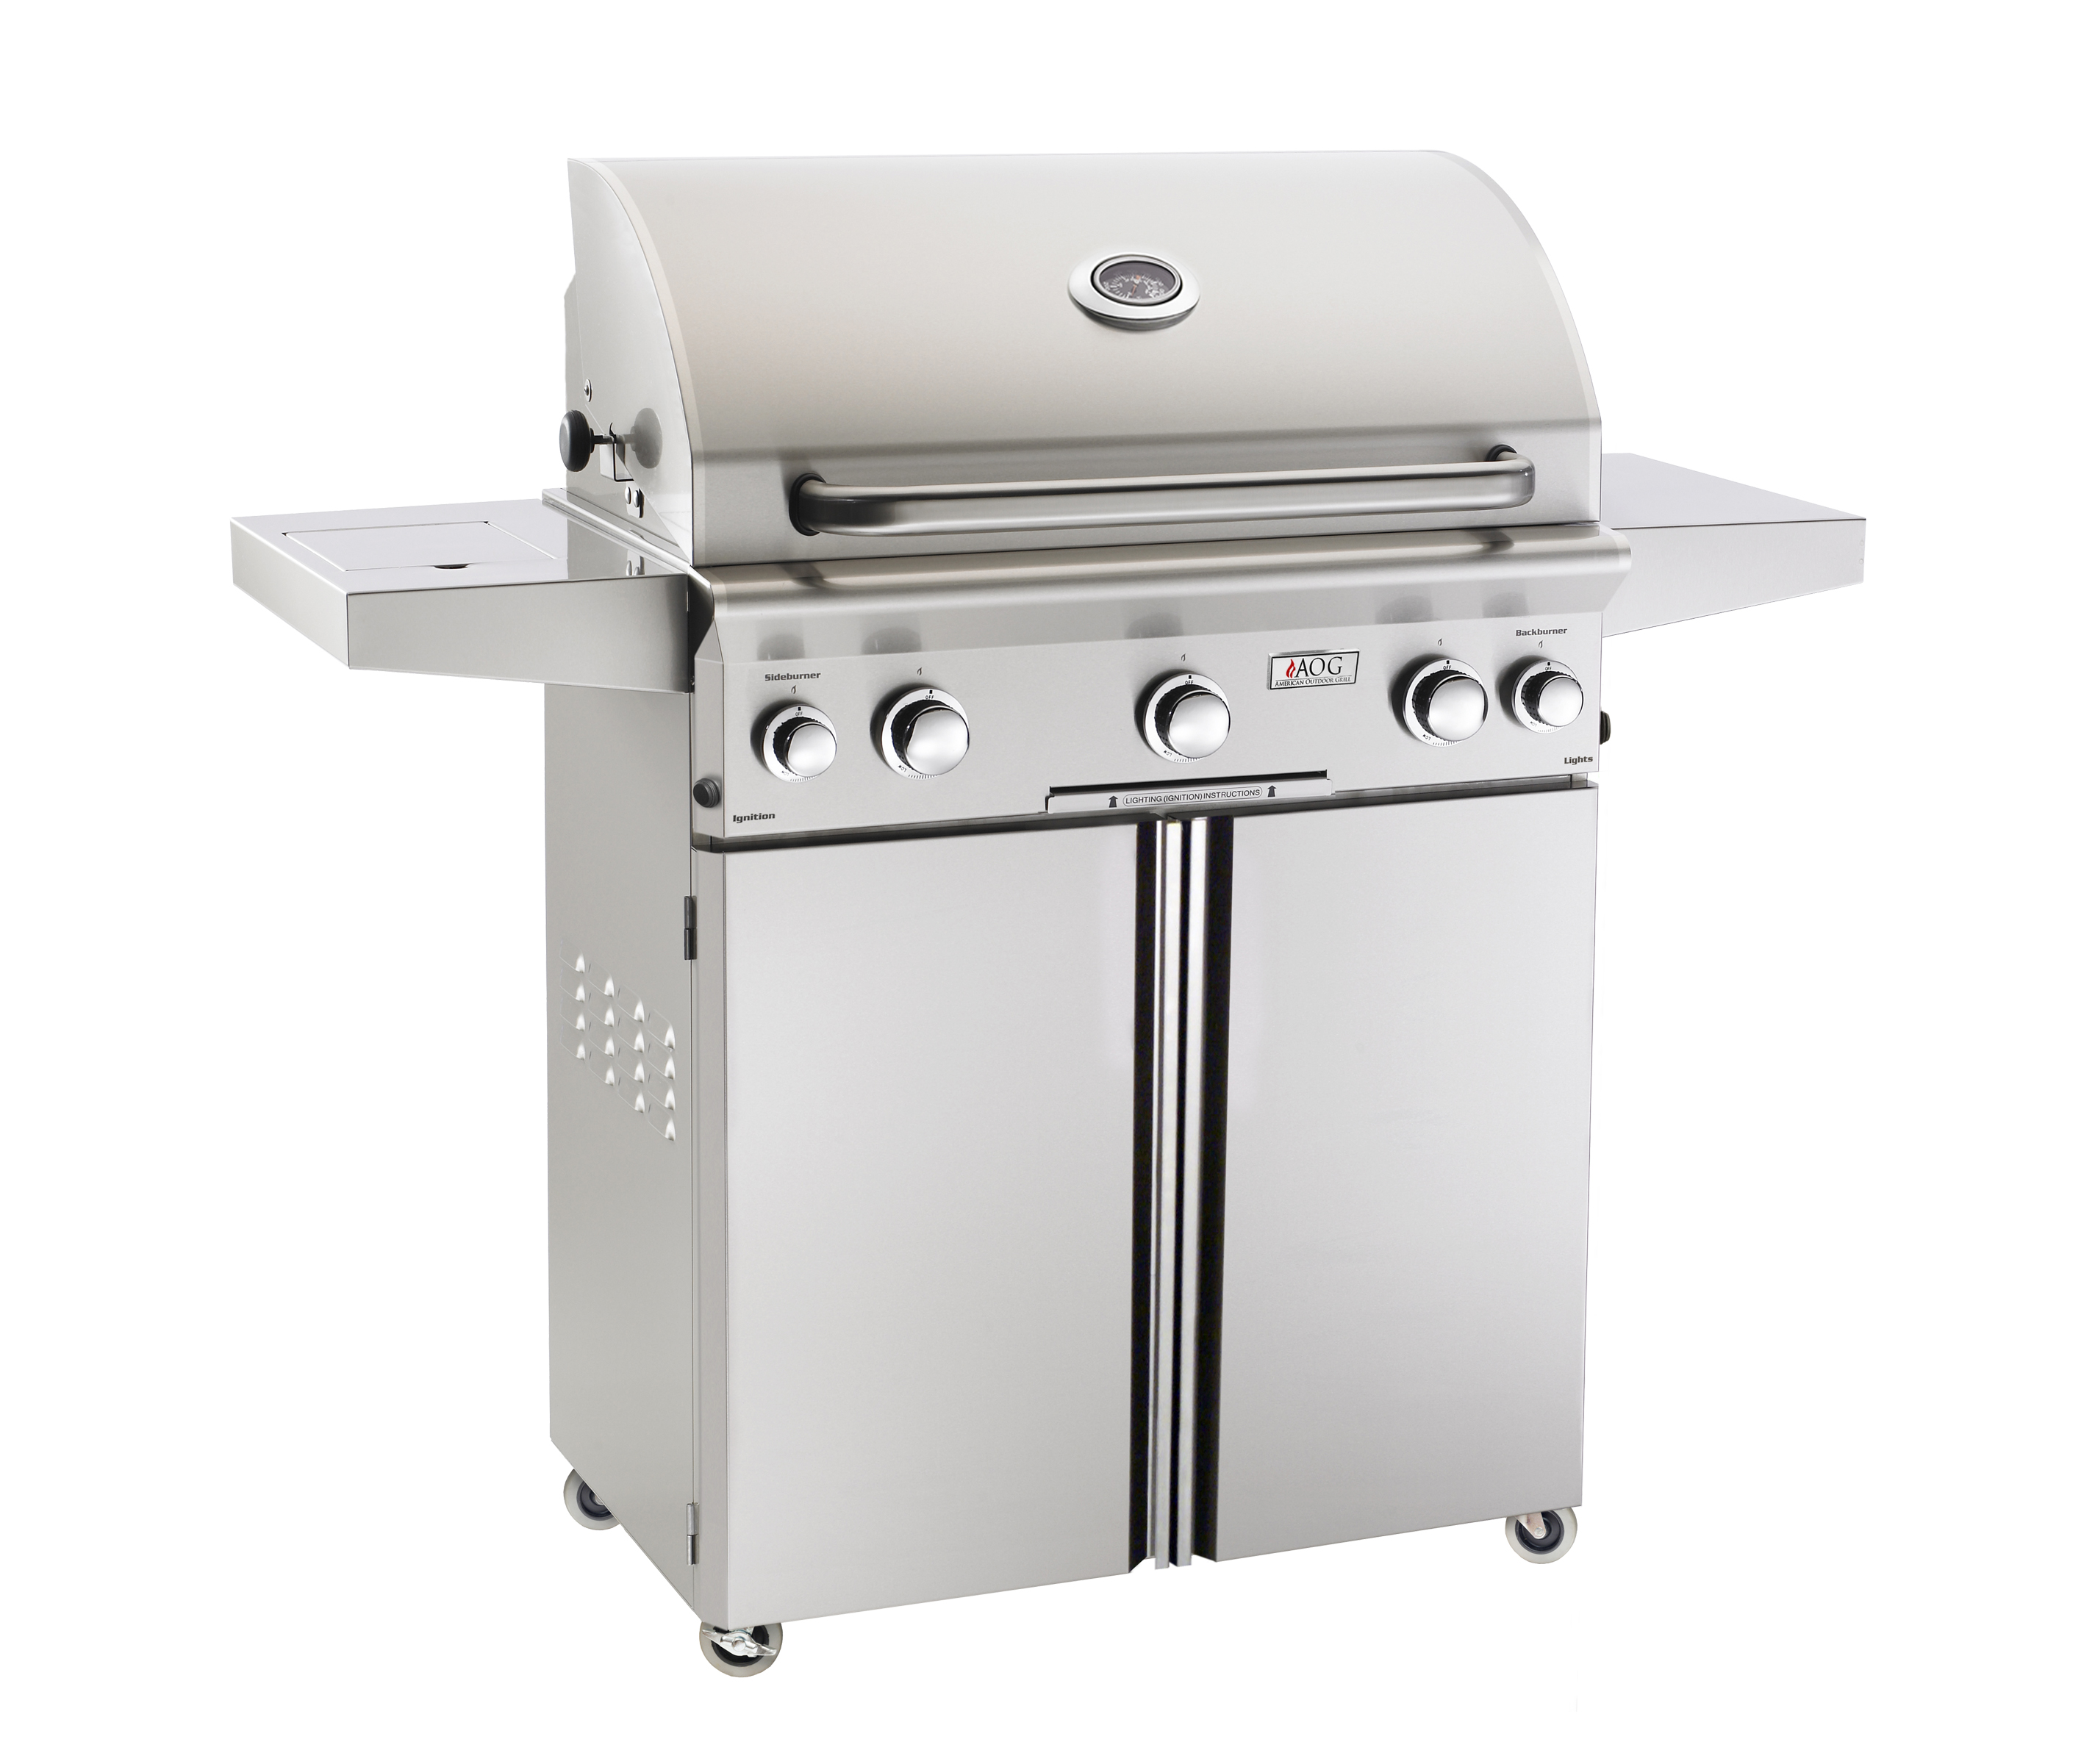 aog-30pcl-30-l-series-portable-grill-closed.jpg